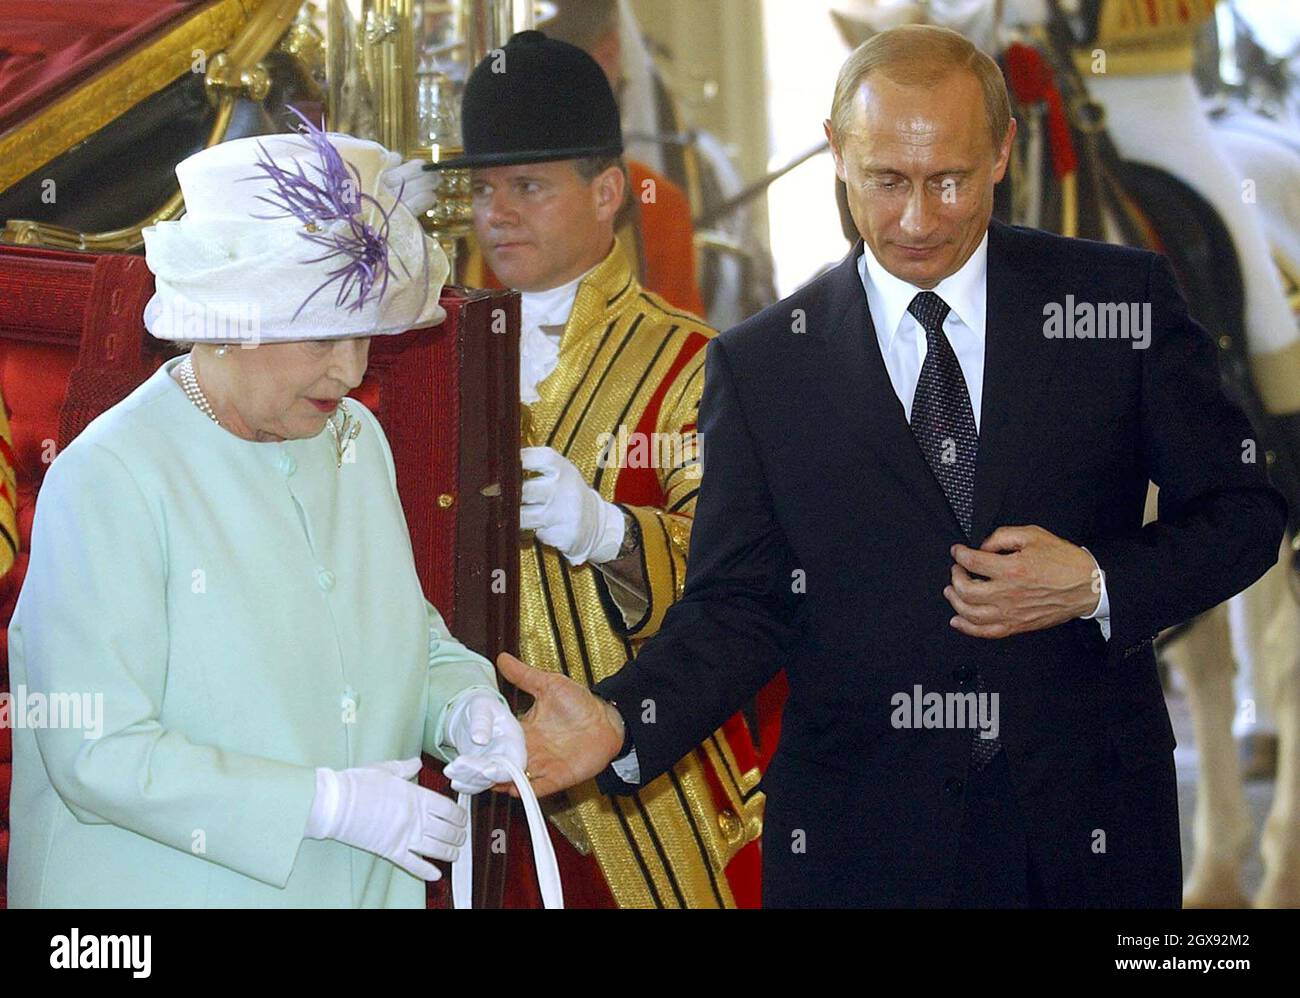 Putin Hat High Resolution Stock Photography and Images - Alamy